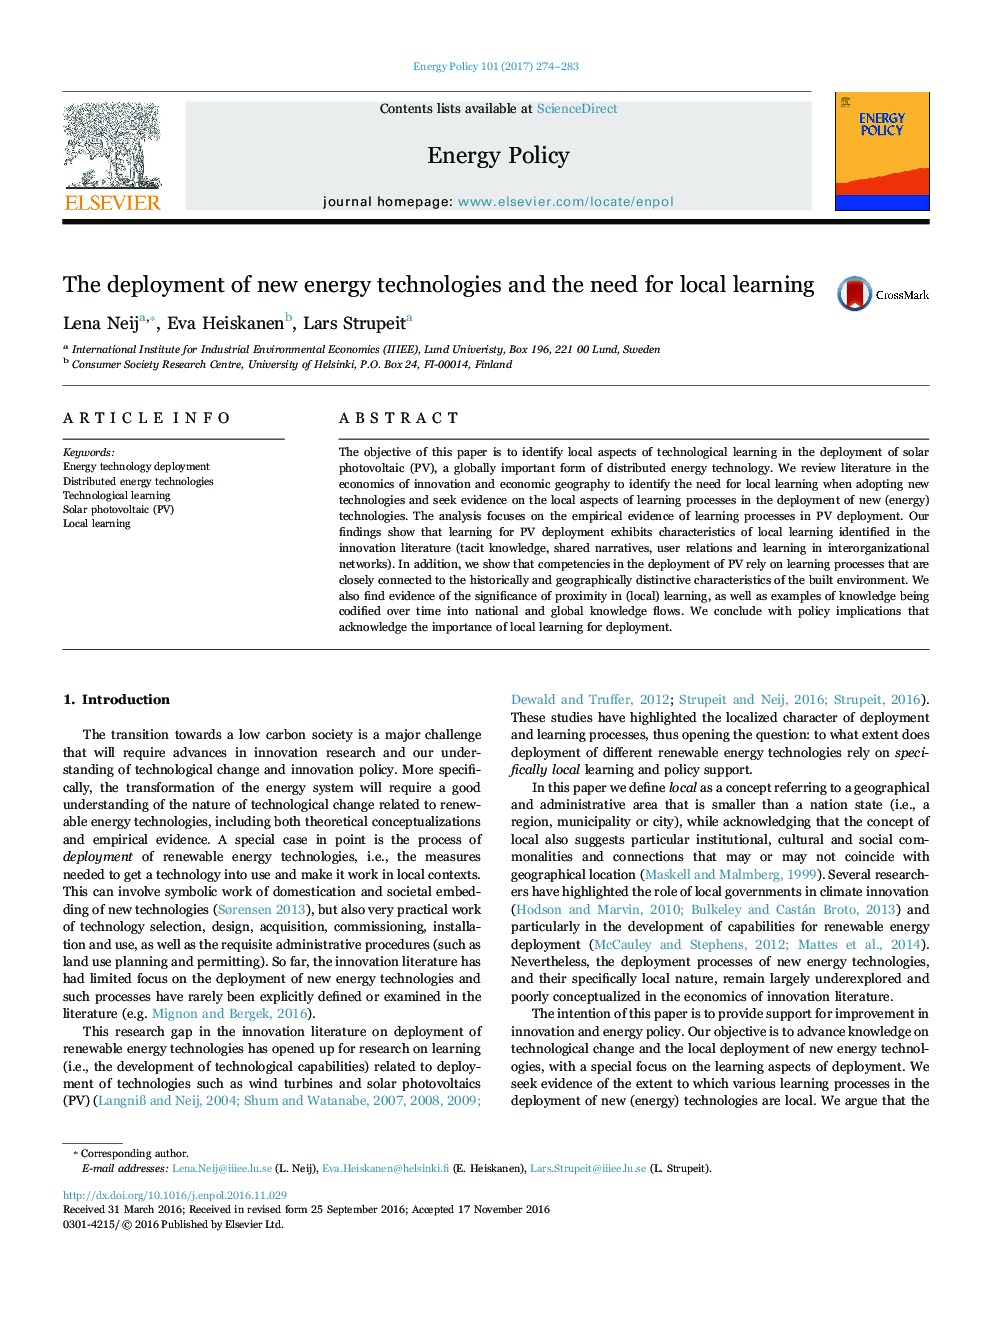 The deployment of new energy technologies and the need for local learning